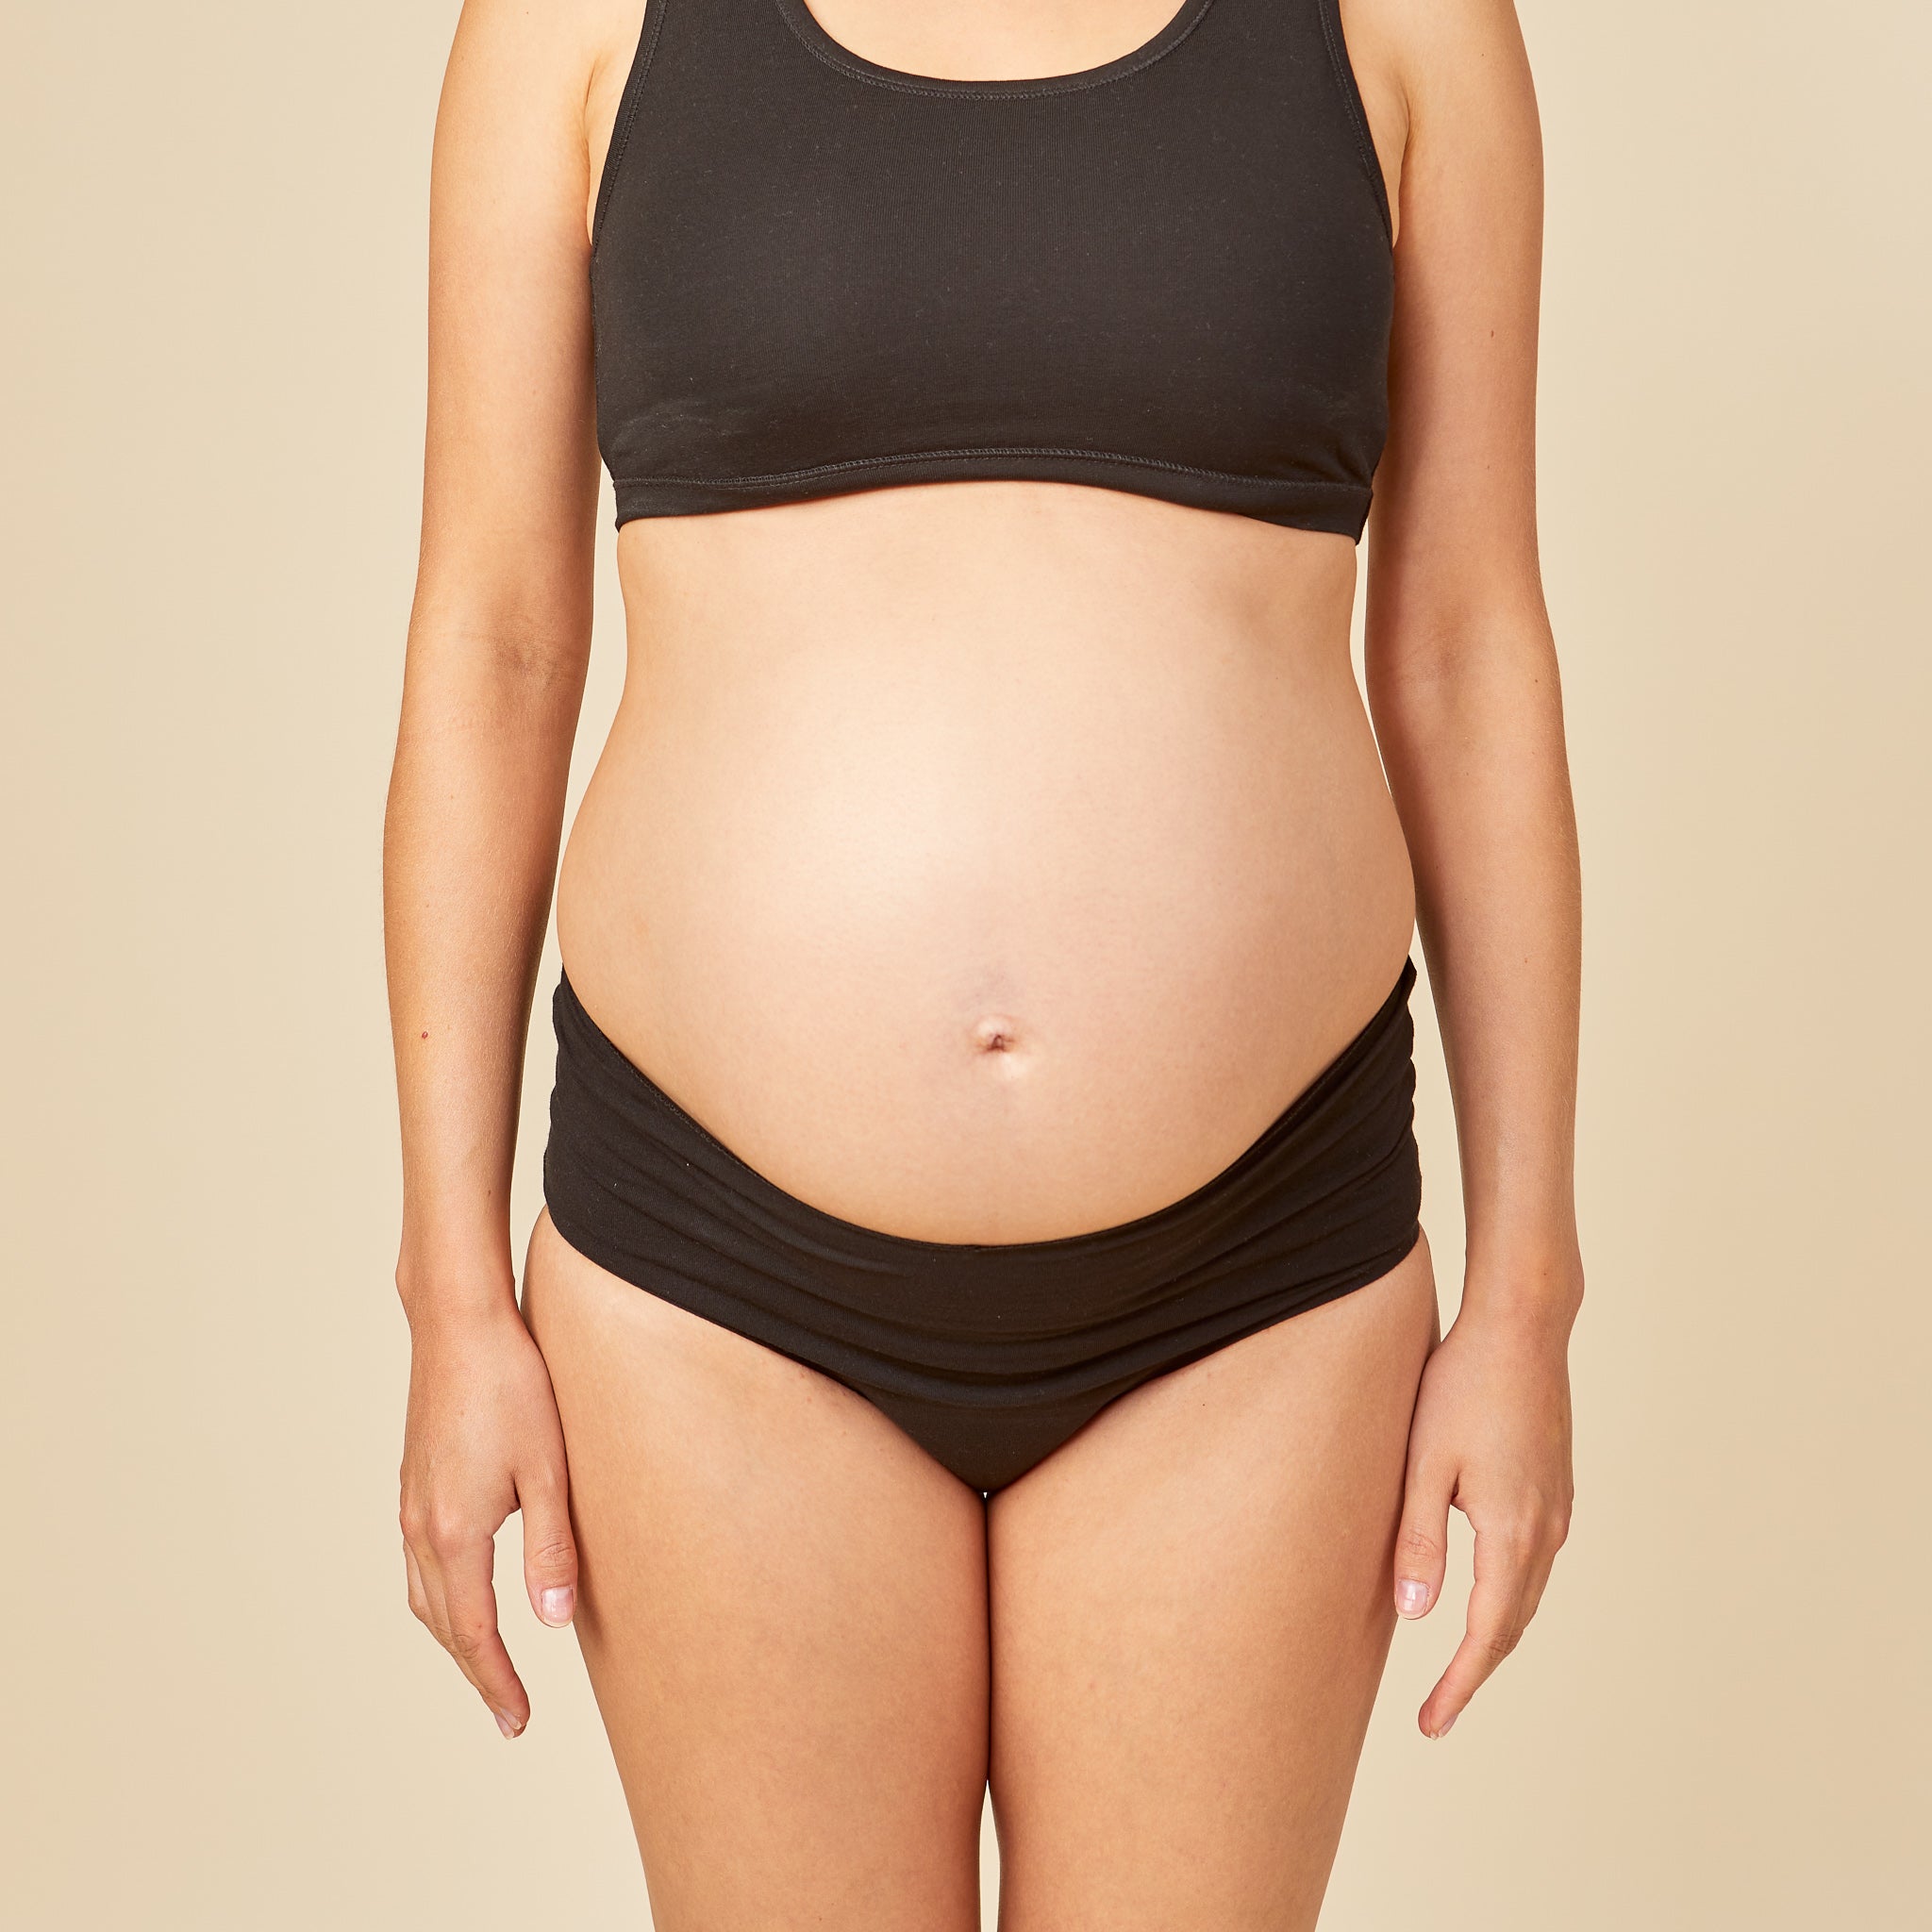 dais maternity absorbent and washable underwear from the front modelled on a pregnant woman.